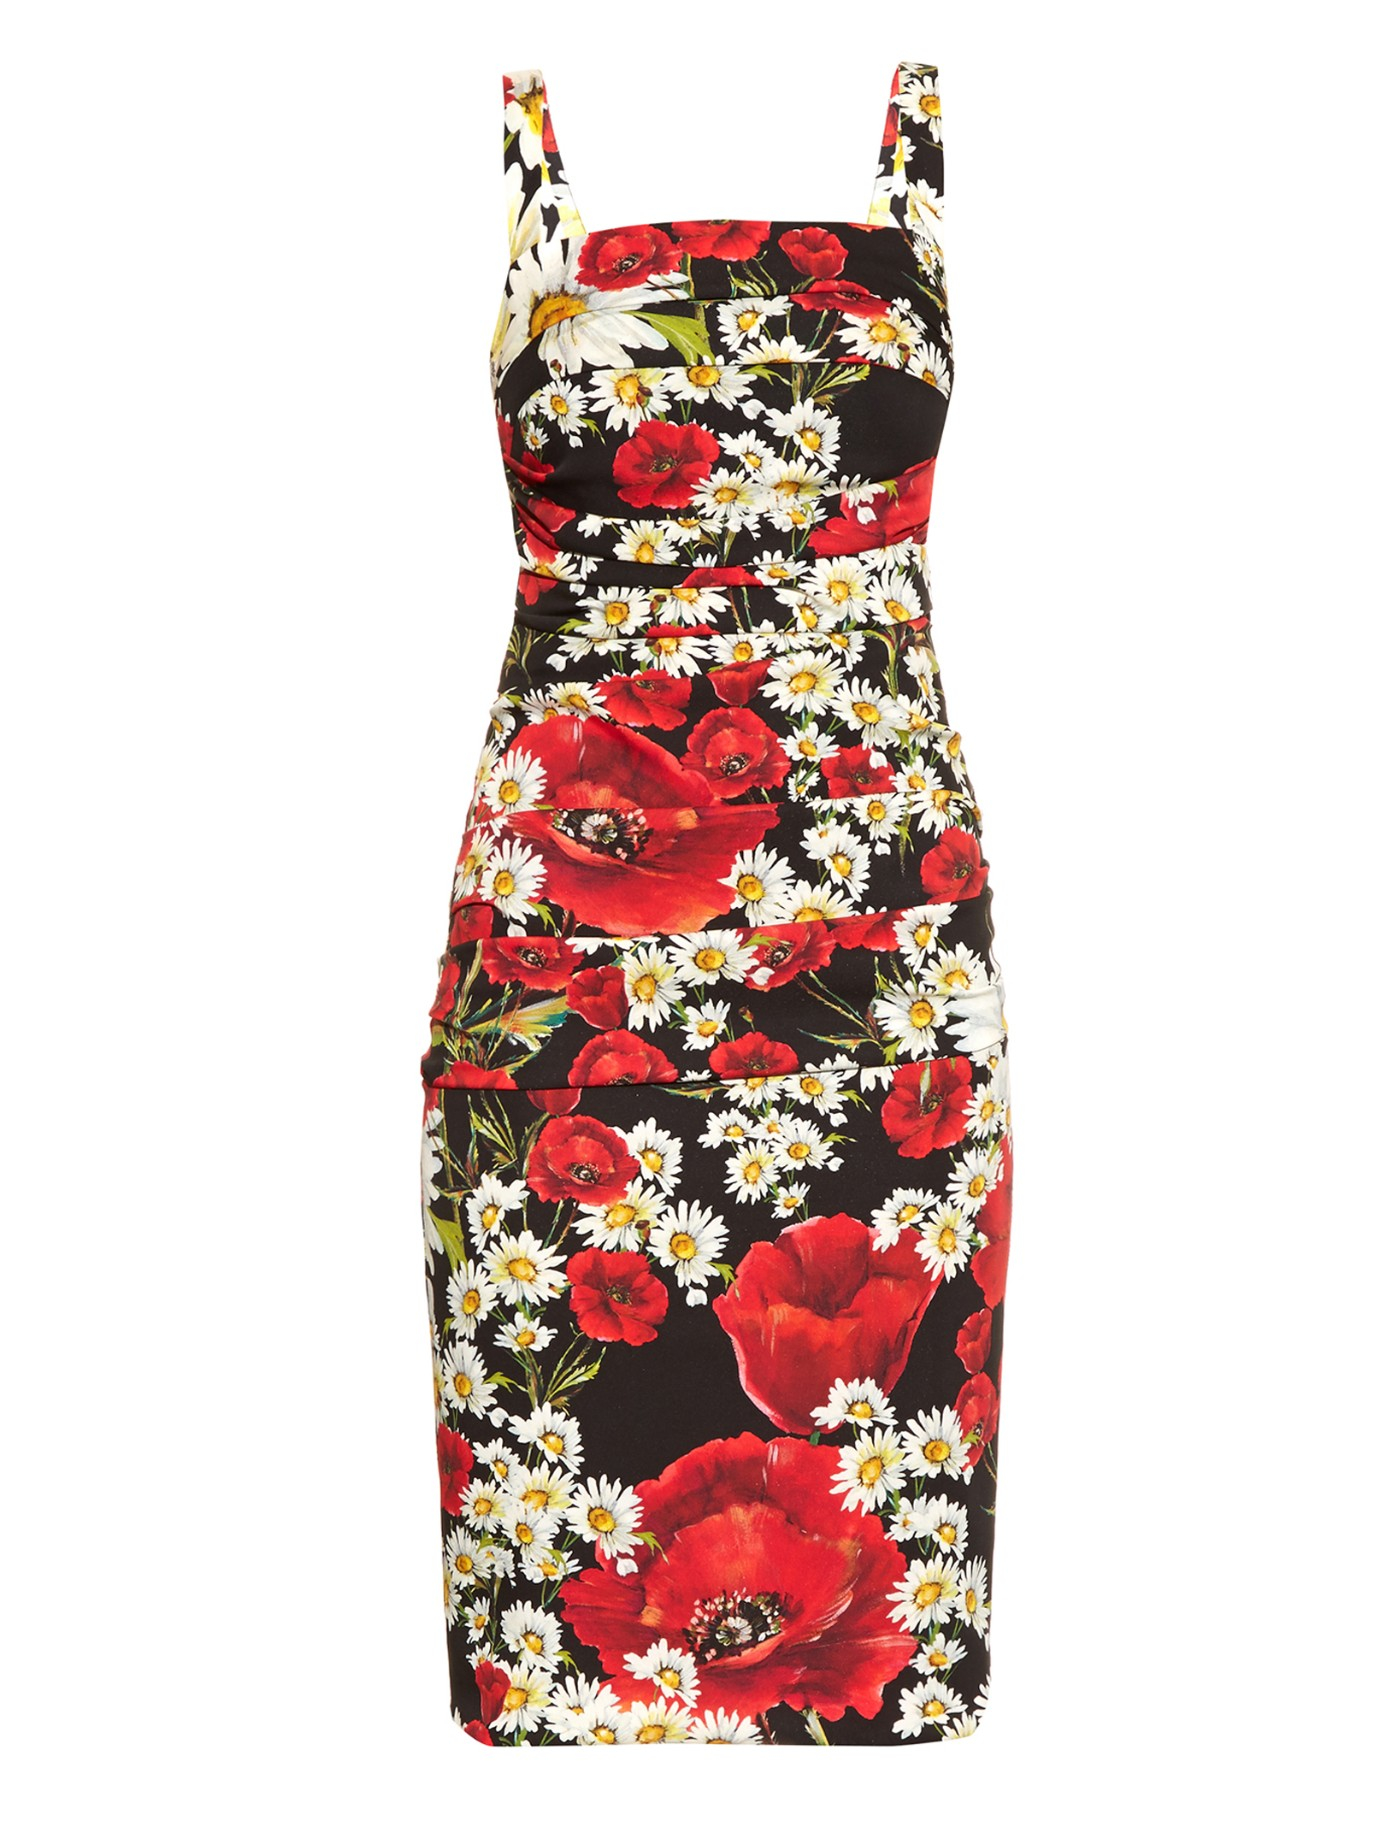 Lyst - Dolce & Gabbana Floral-print Ruched Silk Dress in Red